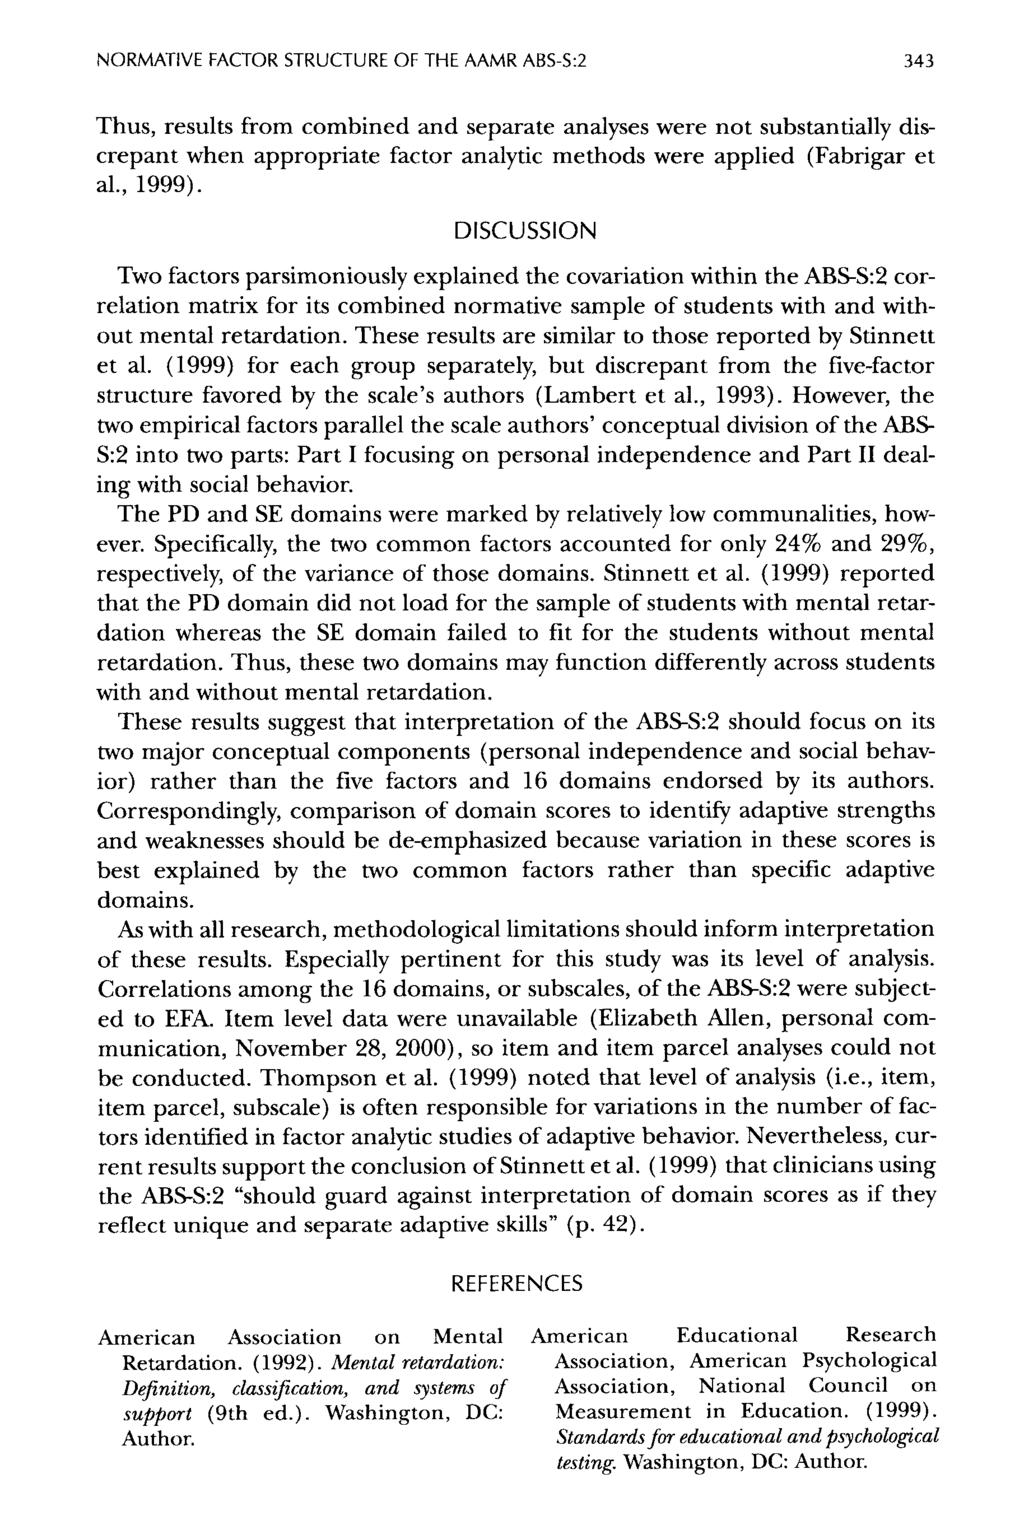 NORMATIVE FACTOR STRUCTURE OF THE MMR ABS-S:2 343 Thus, results from combined and separate analyses were not substantially discrepant when appropriate factor analytic methods were applied (Fabrigar